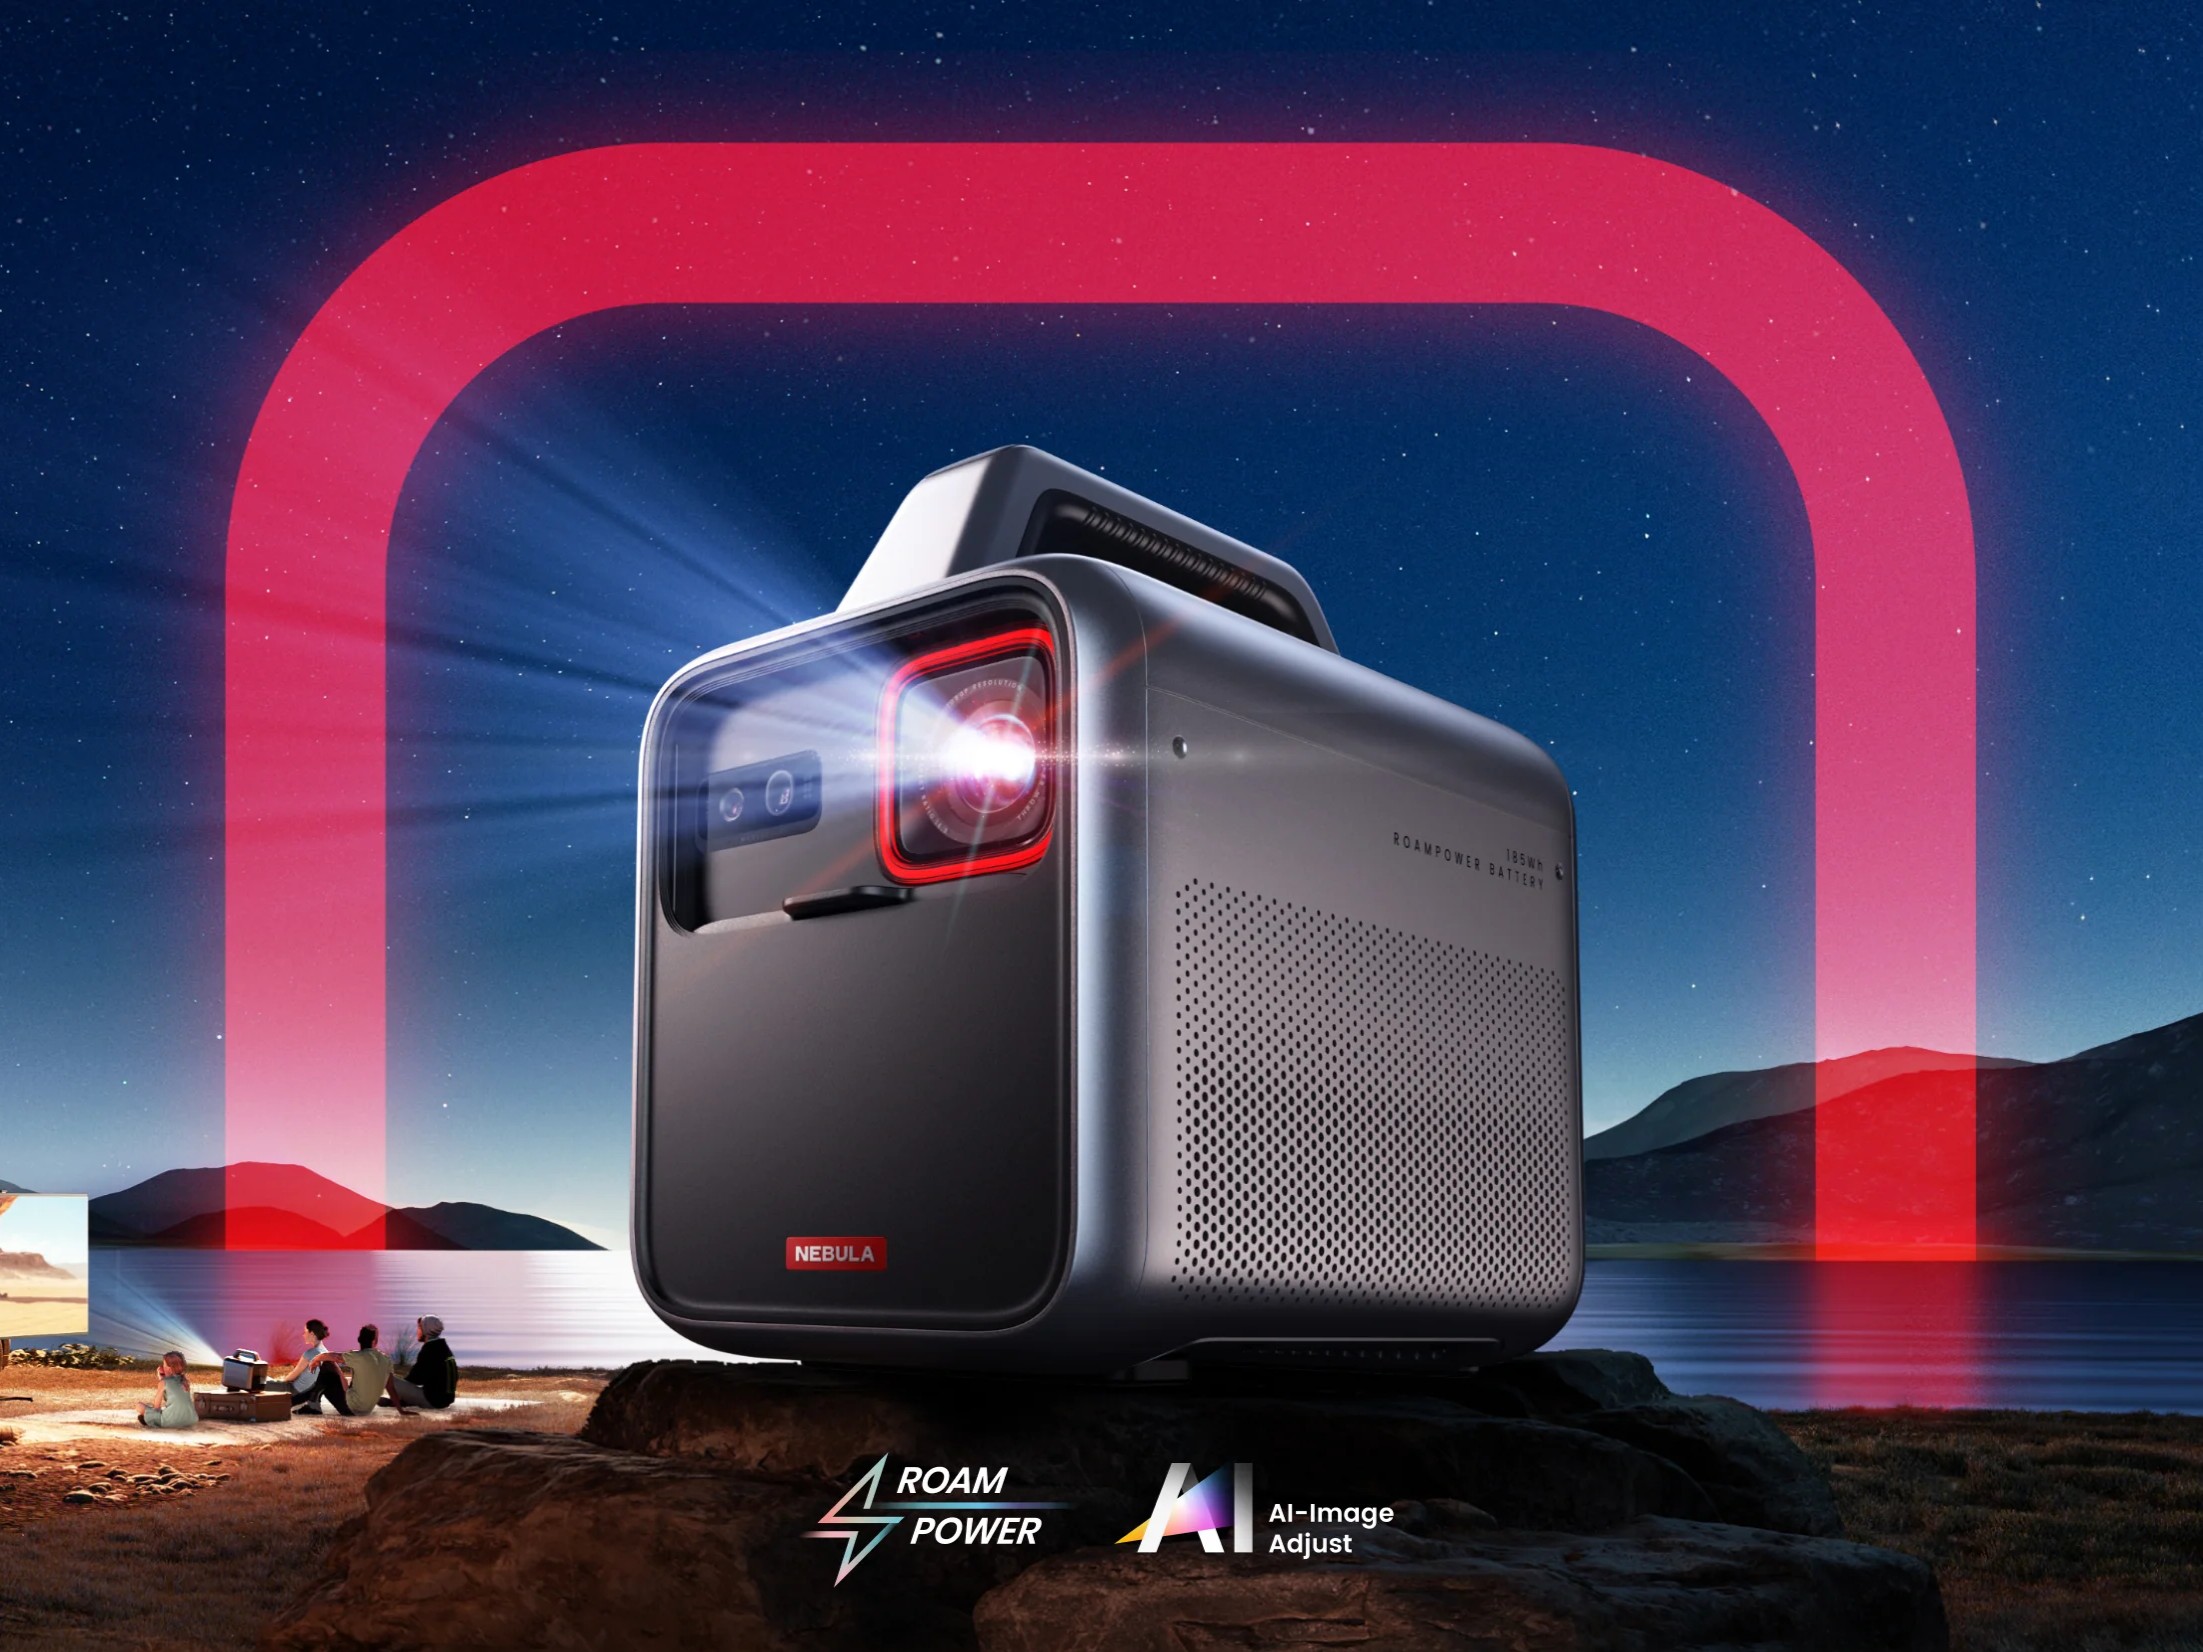 New Anker Nebula Mars 3 outdoor projector with 1,000 ANSI lumens brightness  unveiled -  News